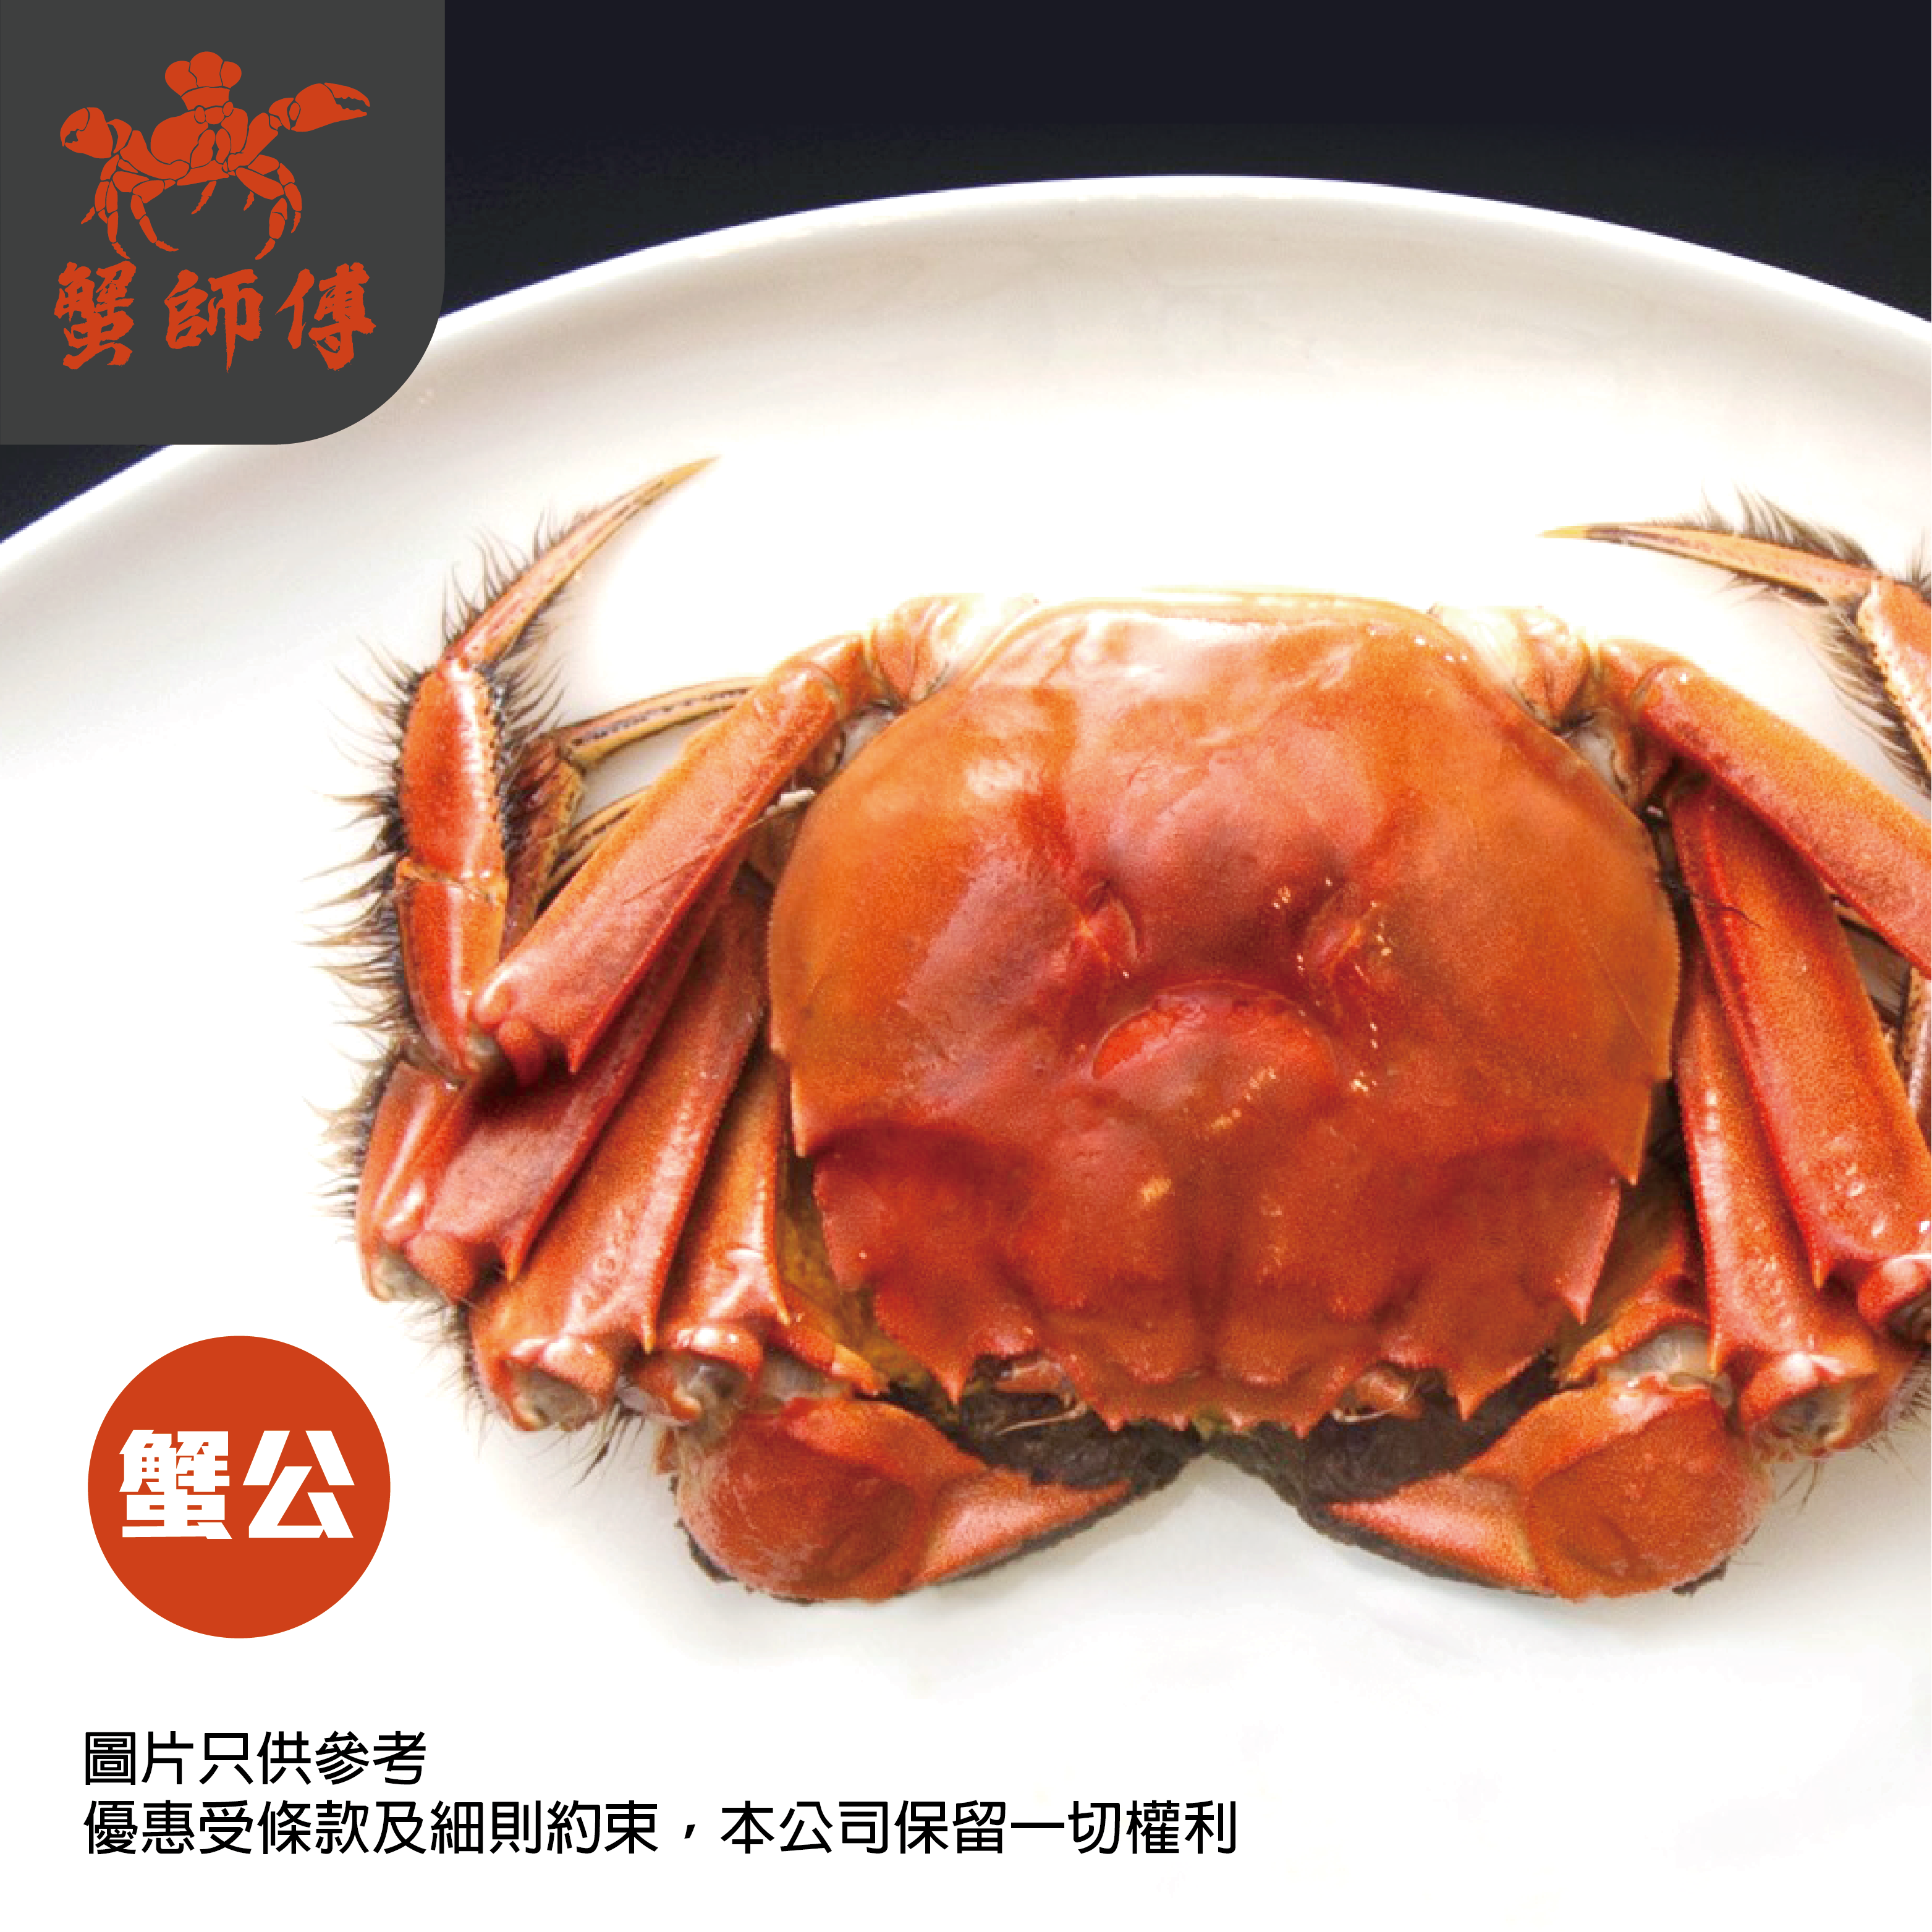 "Crab Master" Jiangsu Qingshui Hairy Crabs (Buy more than 1000 packs for delivery)